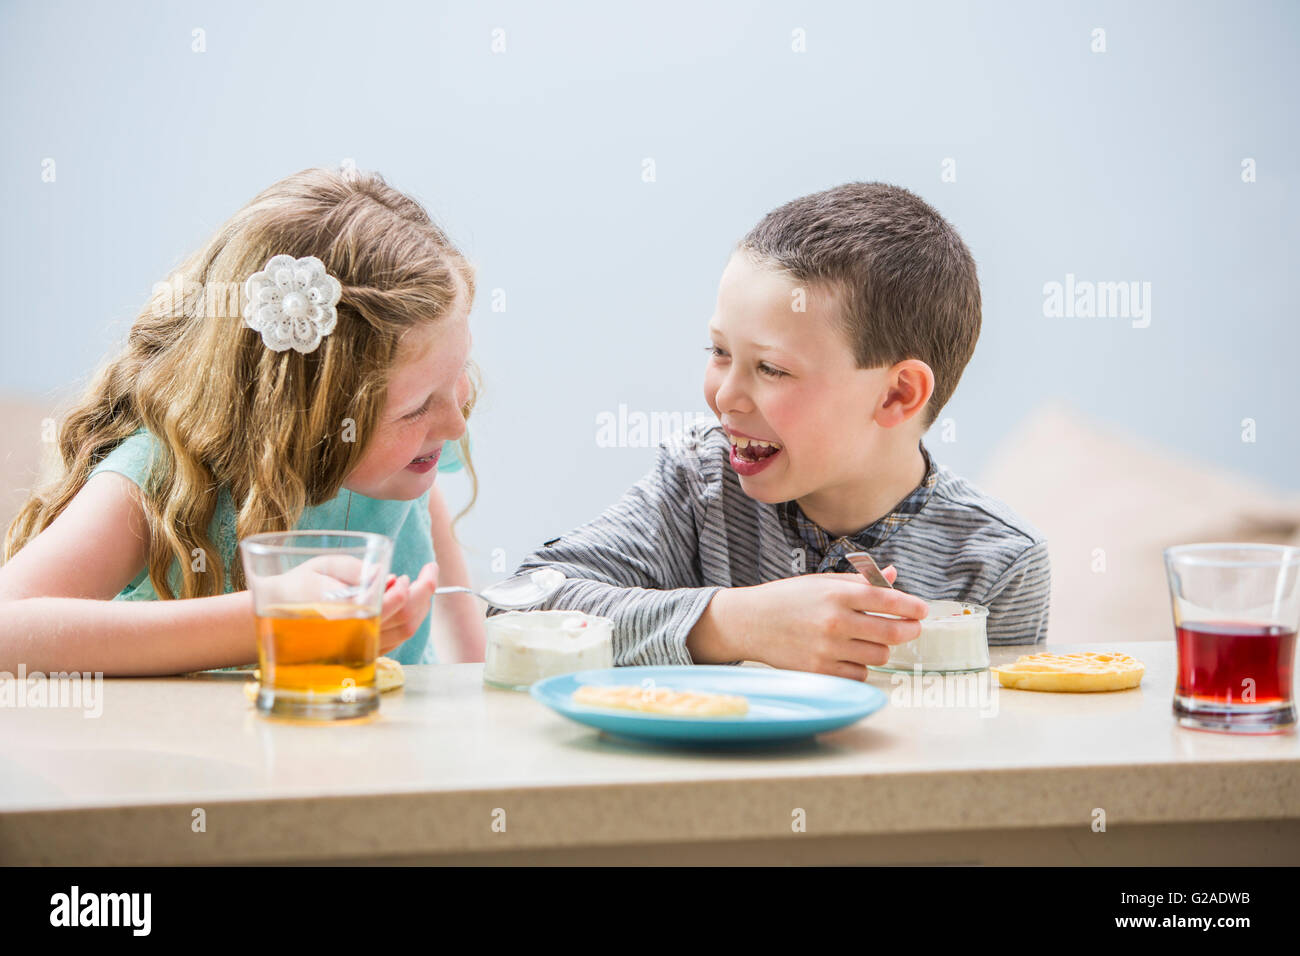 Smiling children (6-7, 8-9) eating pudding at table Stock Photo